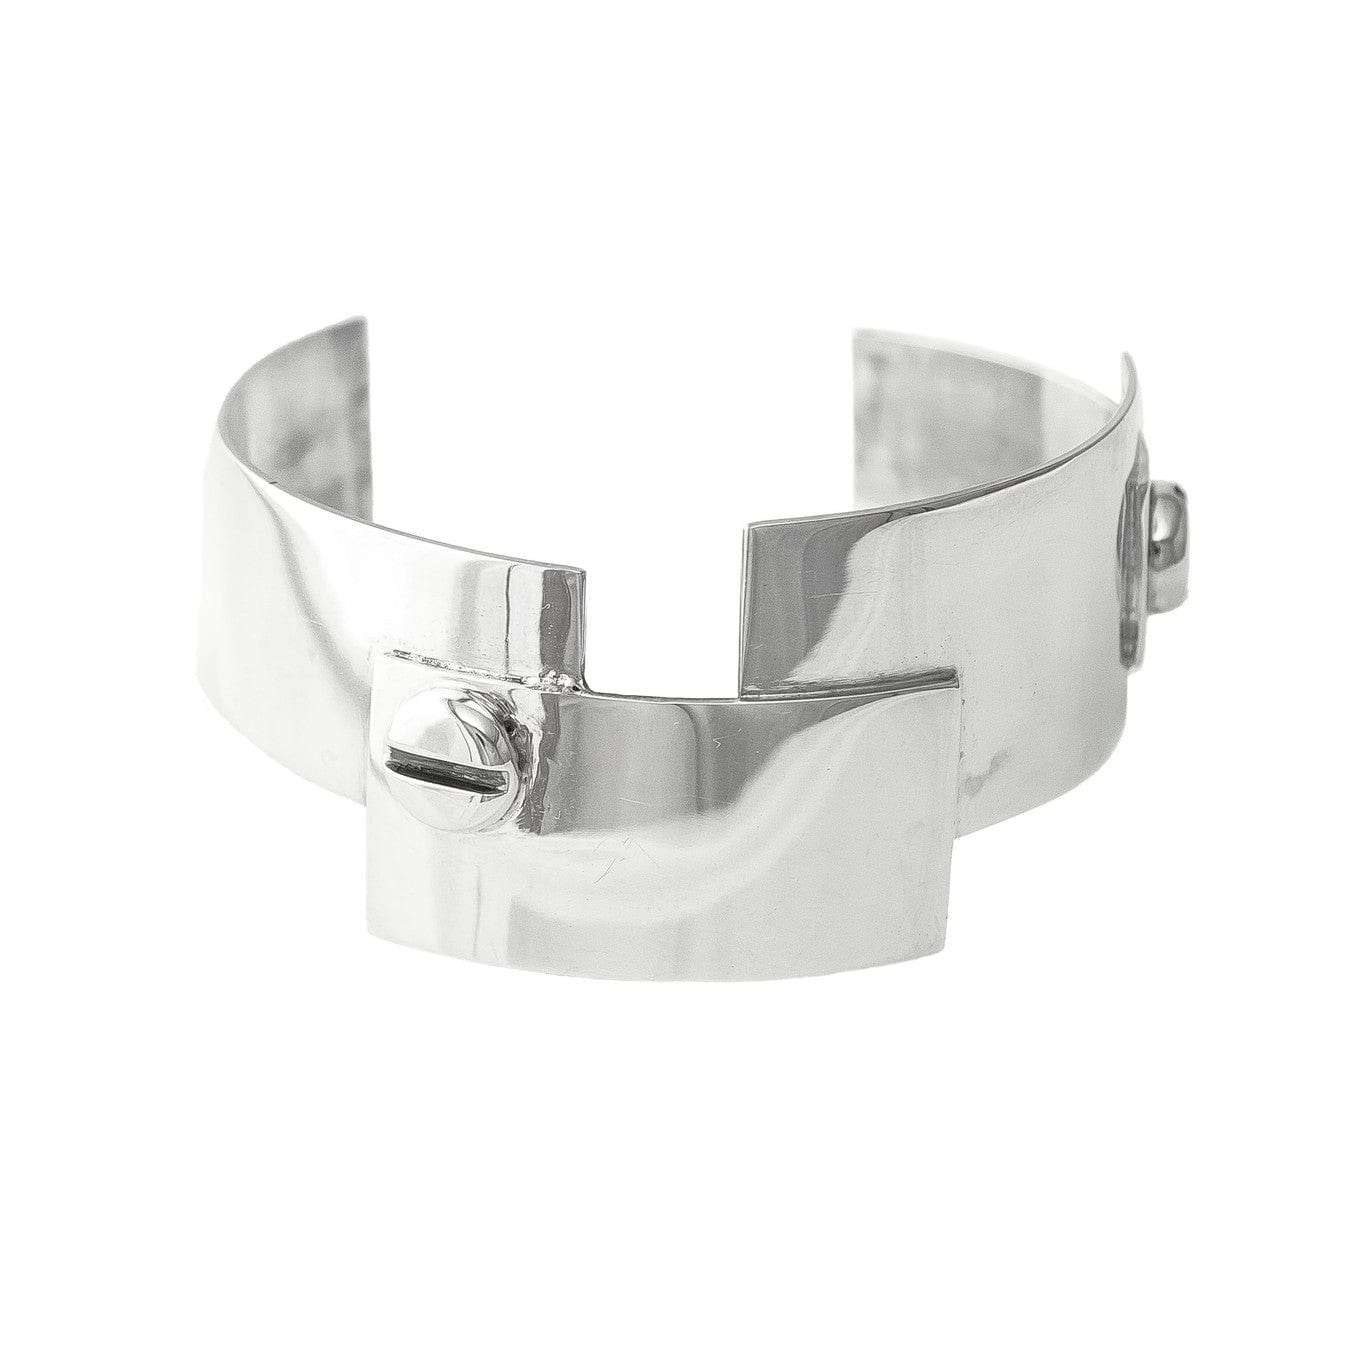 Plate 925 sterling silver bracelet, front view.